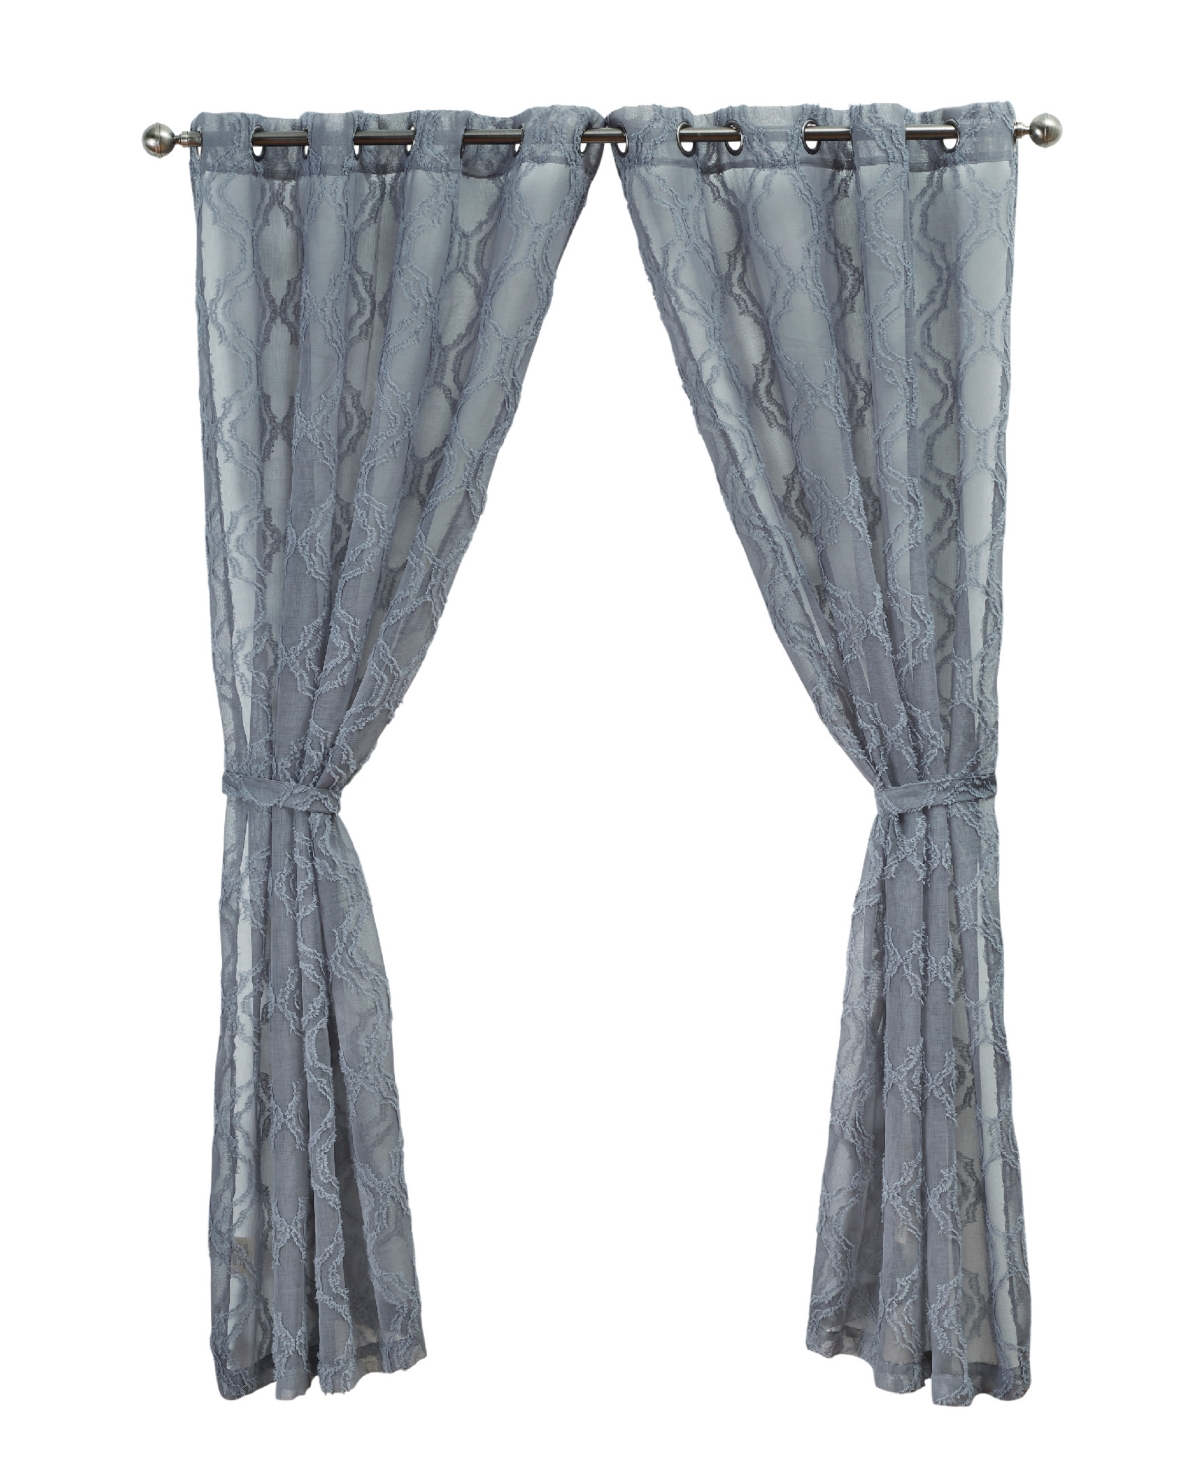 Jessica Simpson Everyn Sheer Embellished Grommet Window Curtain Panel Pair With Tiebacks, 52" X 84" In Charcoal Gray